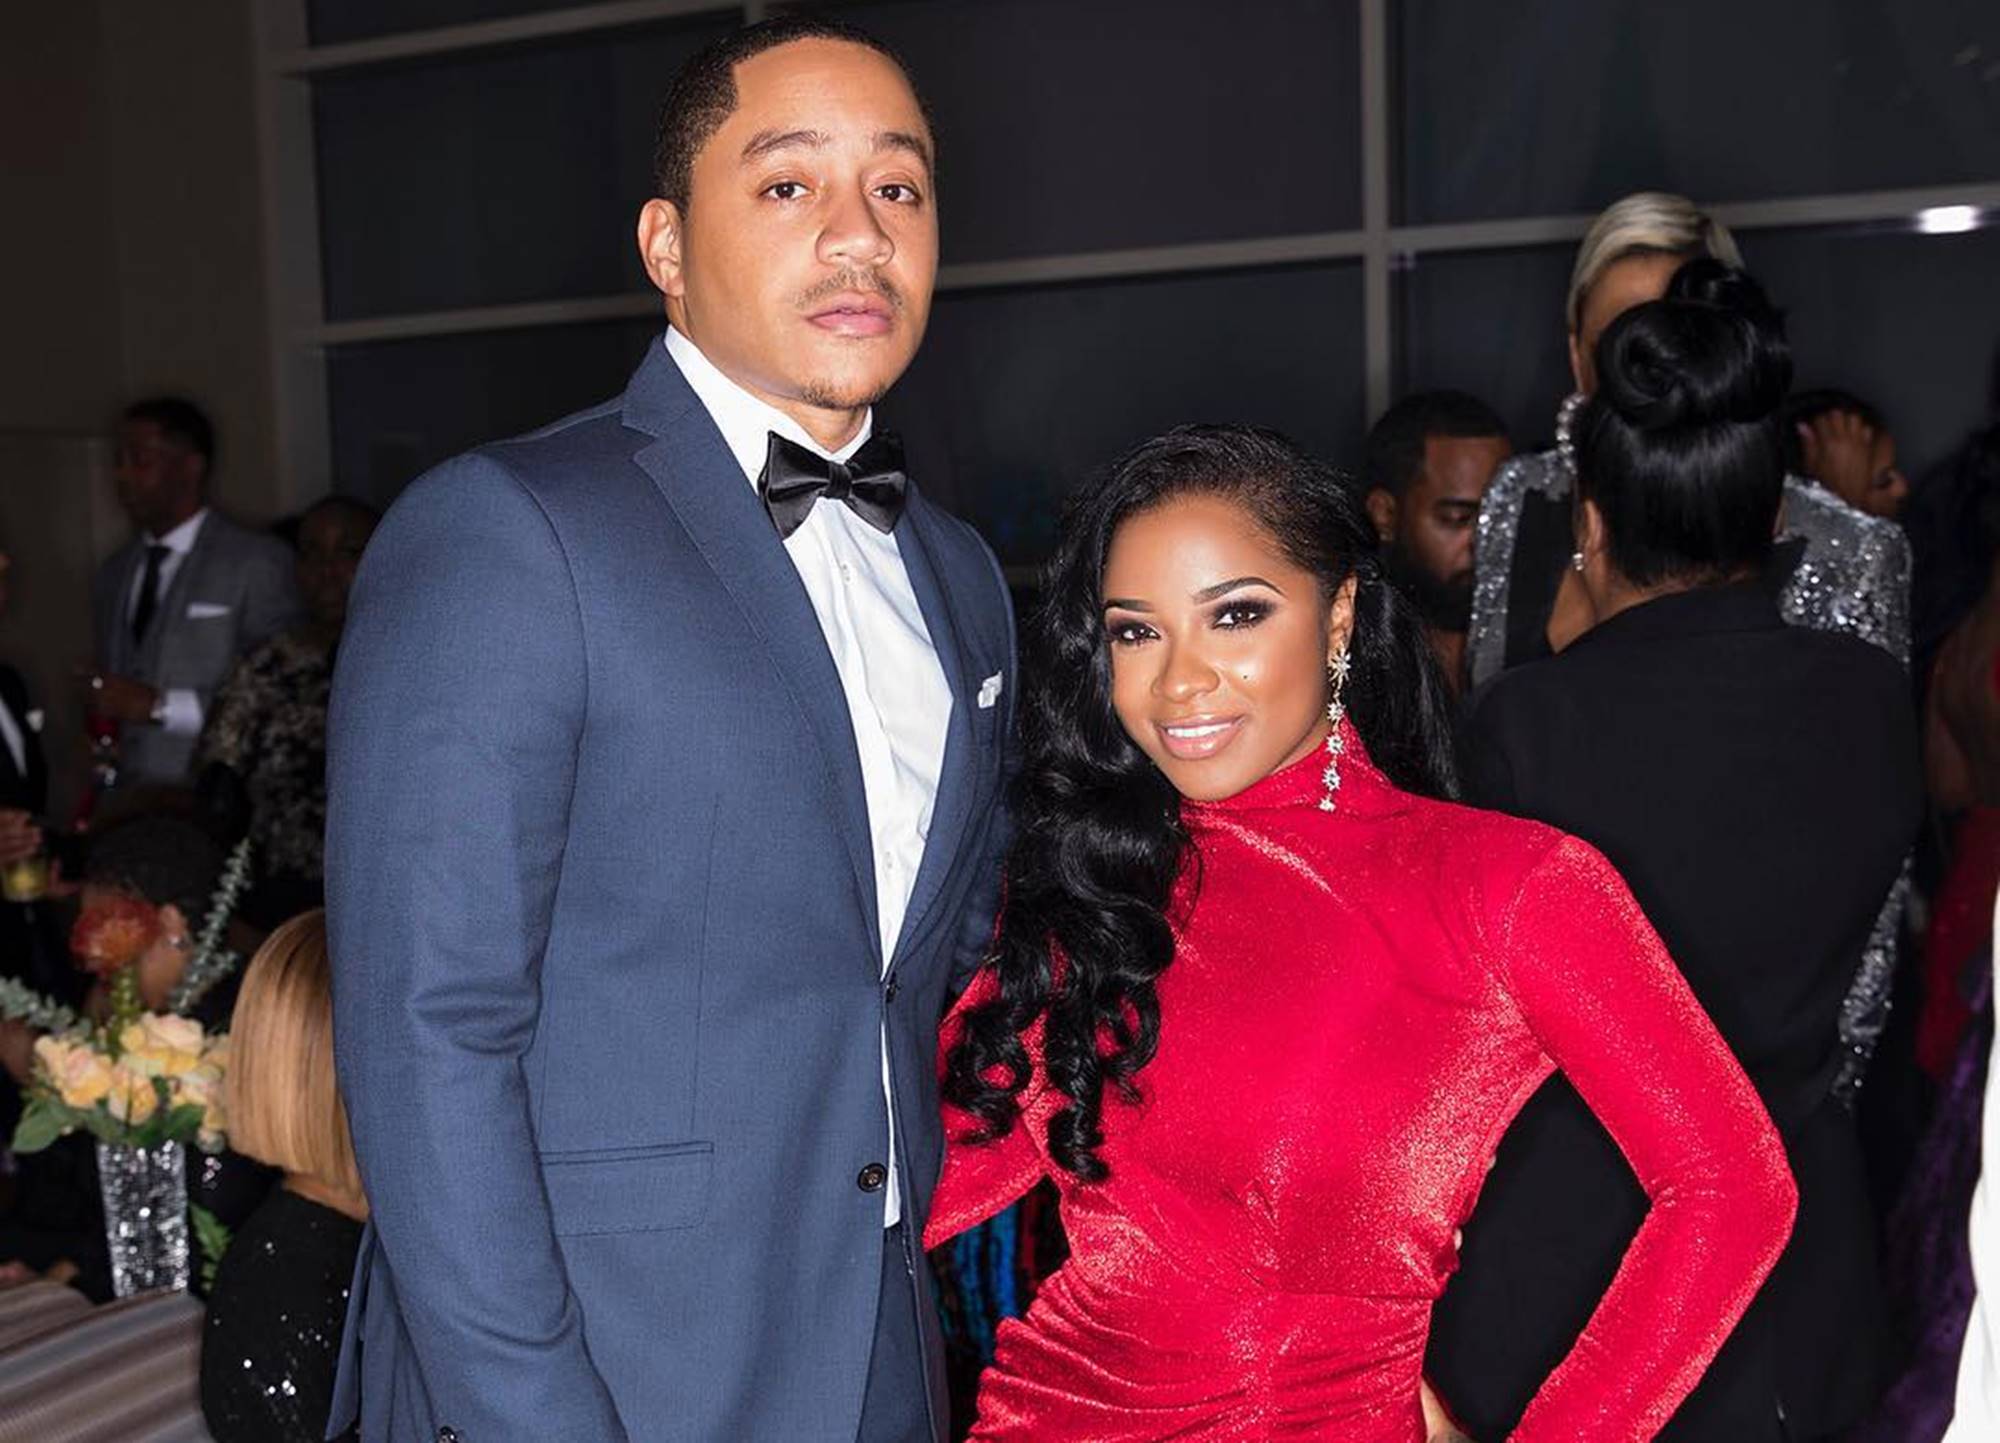 Toya Wright's Fans Are Praying That She And Robert Rushing Get Married One Day: 'She Deserves It'